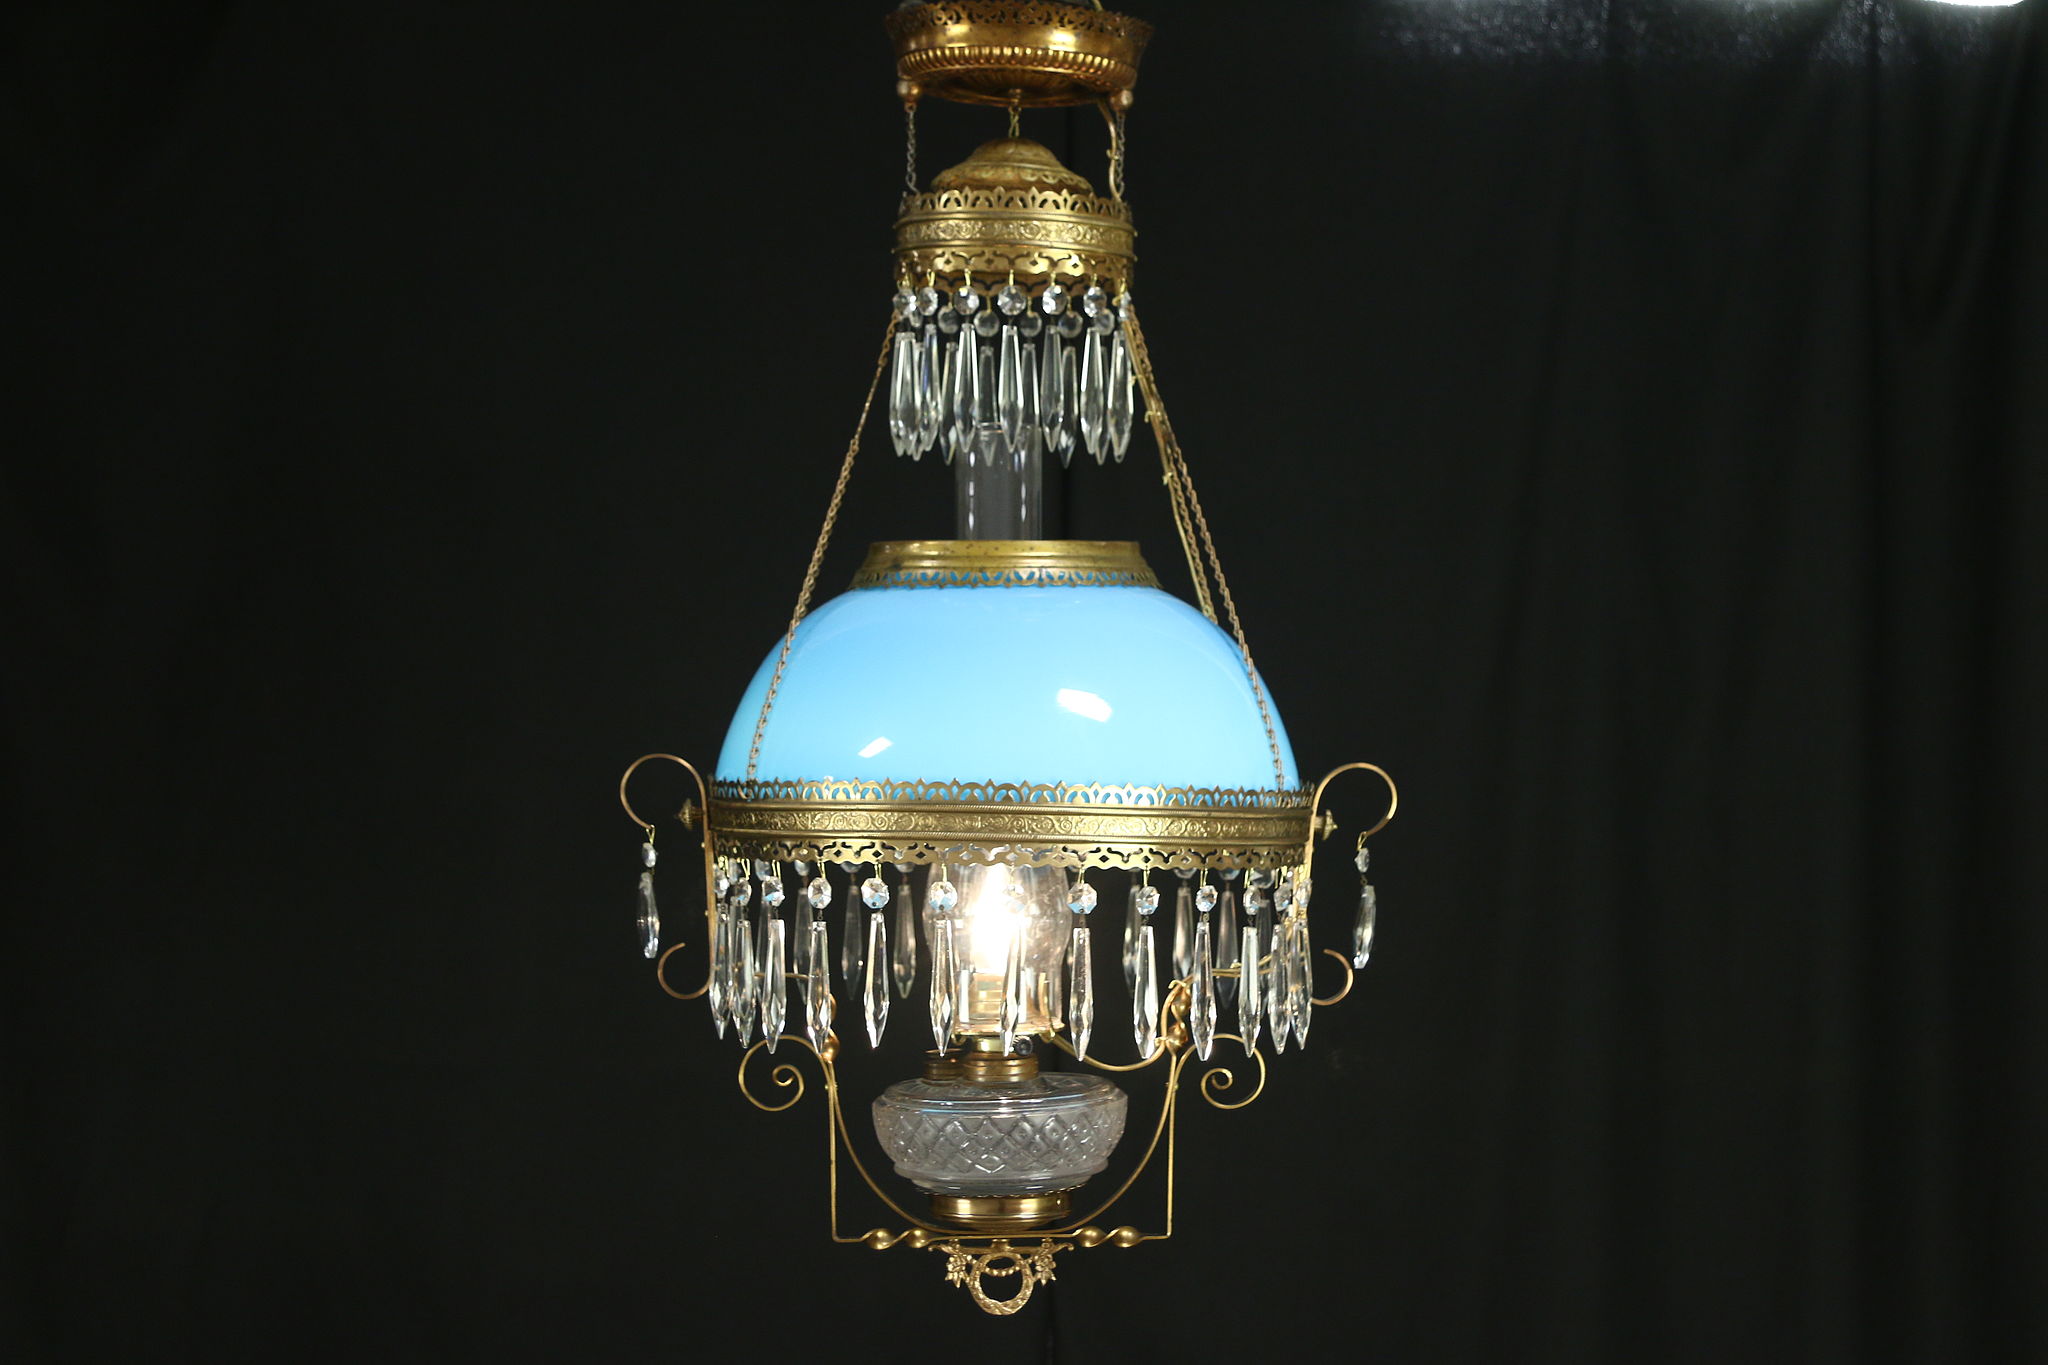 Victorian Antique Hanging Lamp Or Chandelier Blue Art Glass Shade